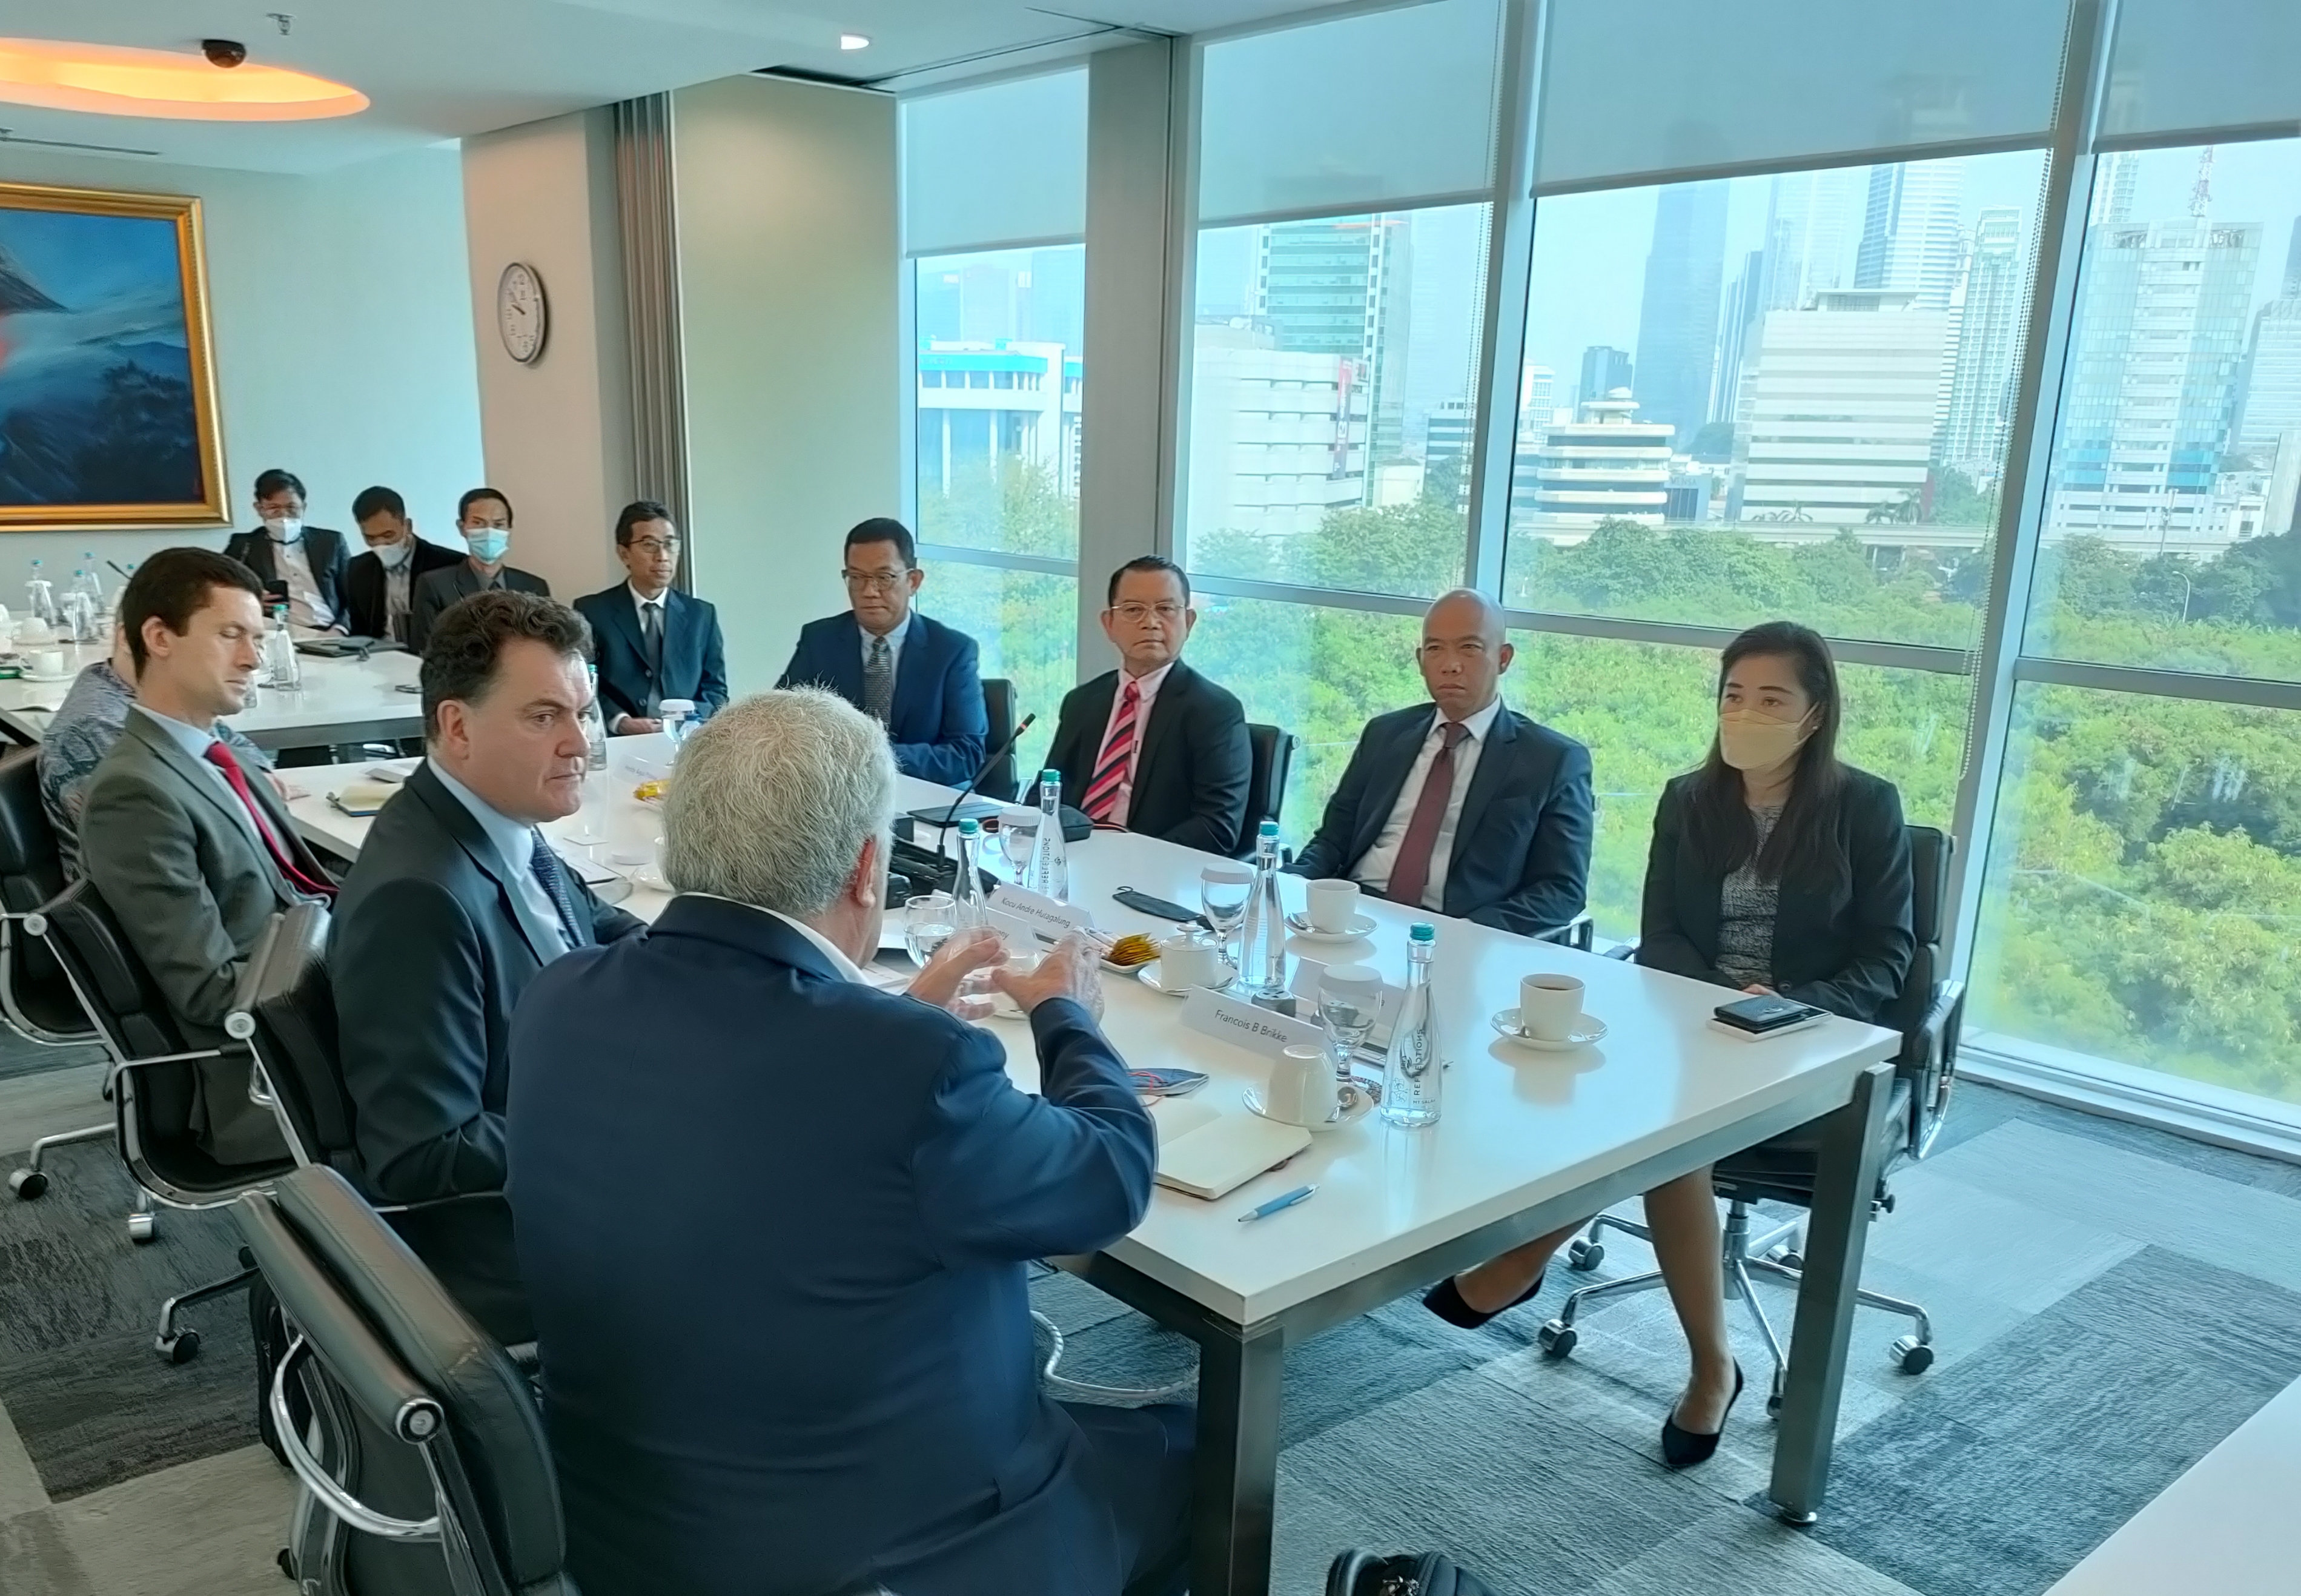 PT. MAIPARK Indonesia Reinsurance (MAIPARK) received a visit from the delegation of the Lord Mayor of London, Alderman Vincent Keaveny 